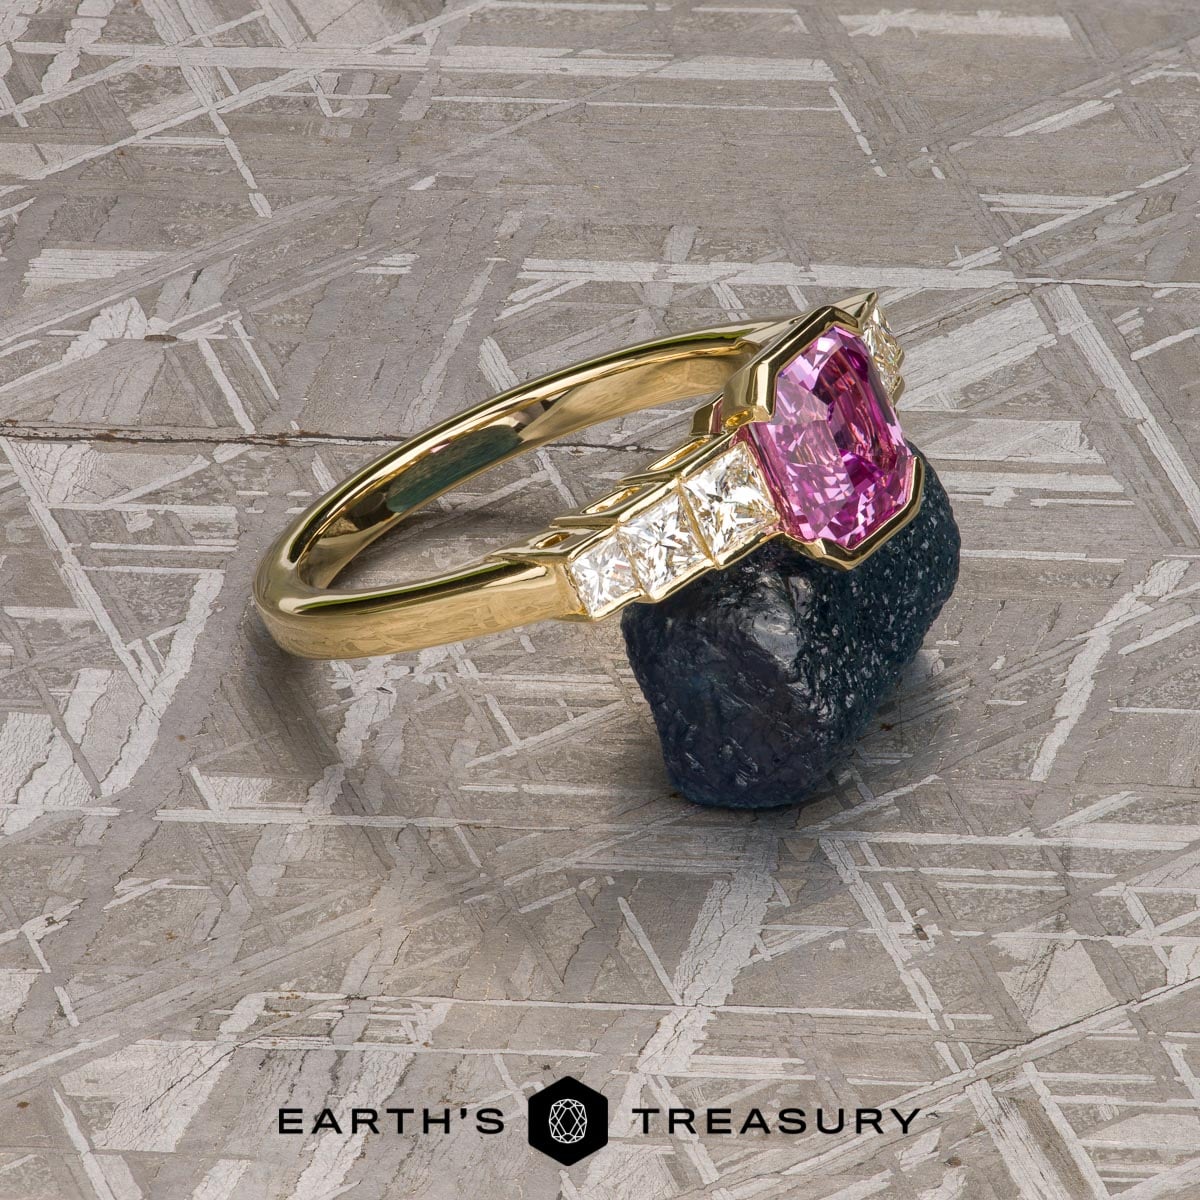 The "Andromeda" Ring in 14k yellow gold with 1.60-carat Ceylon sapphire